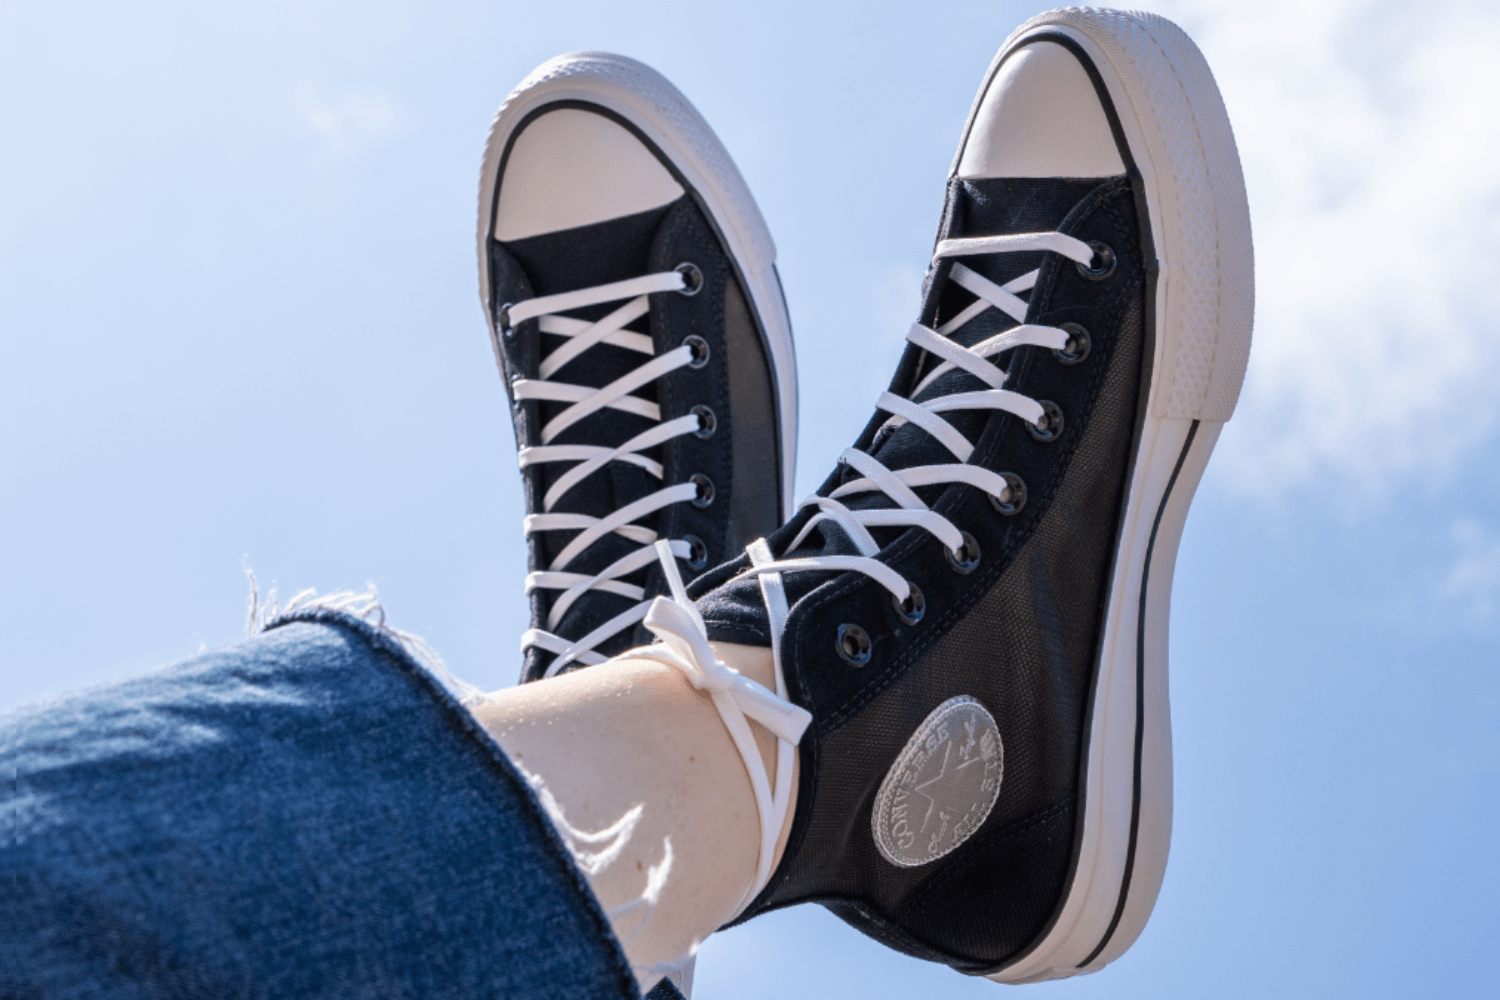 Converse High Top Lacing Guide